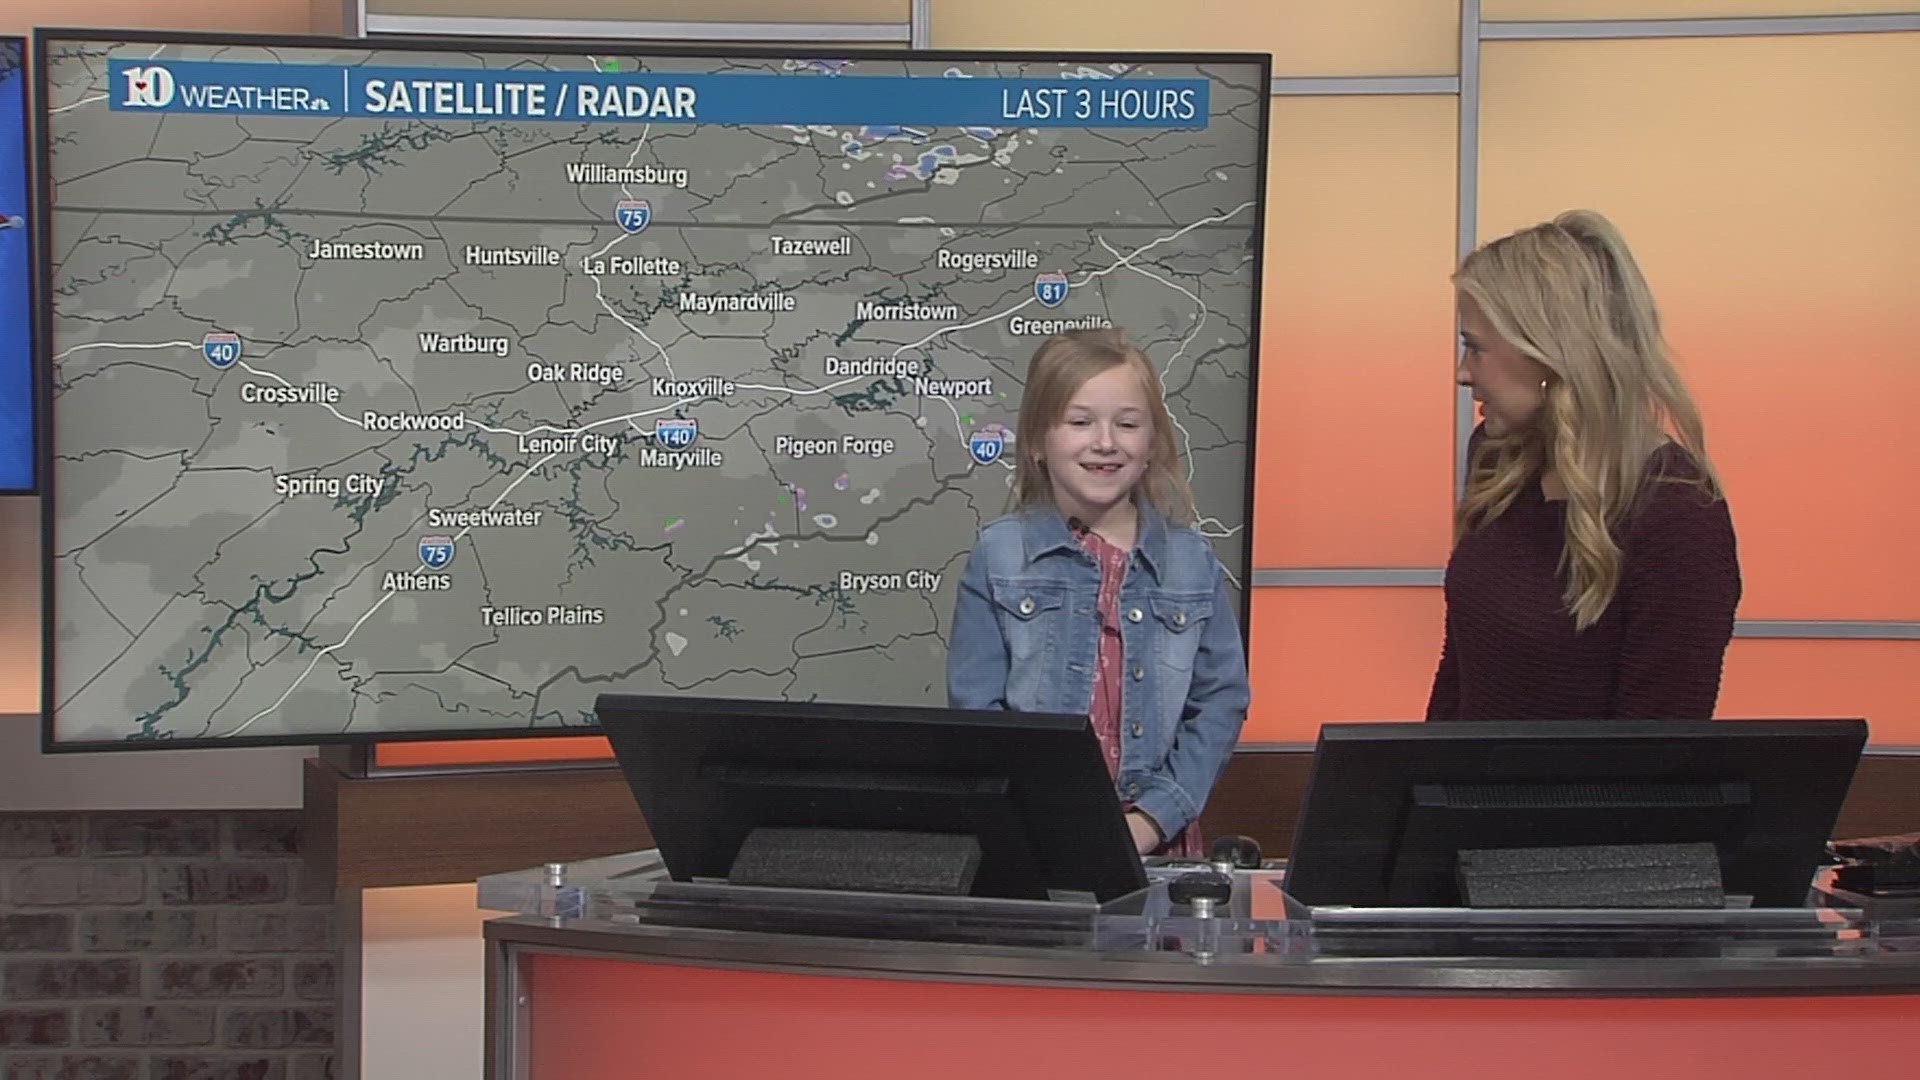 Caroline said she might want to be a meteorologist when she grows up!